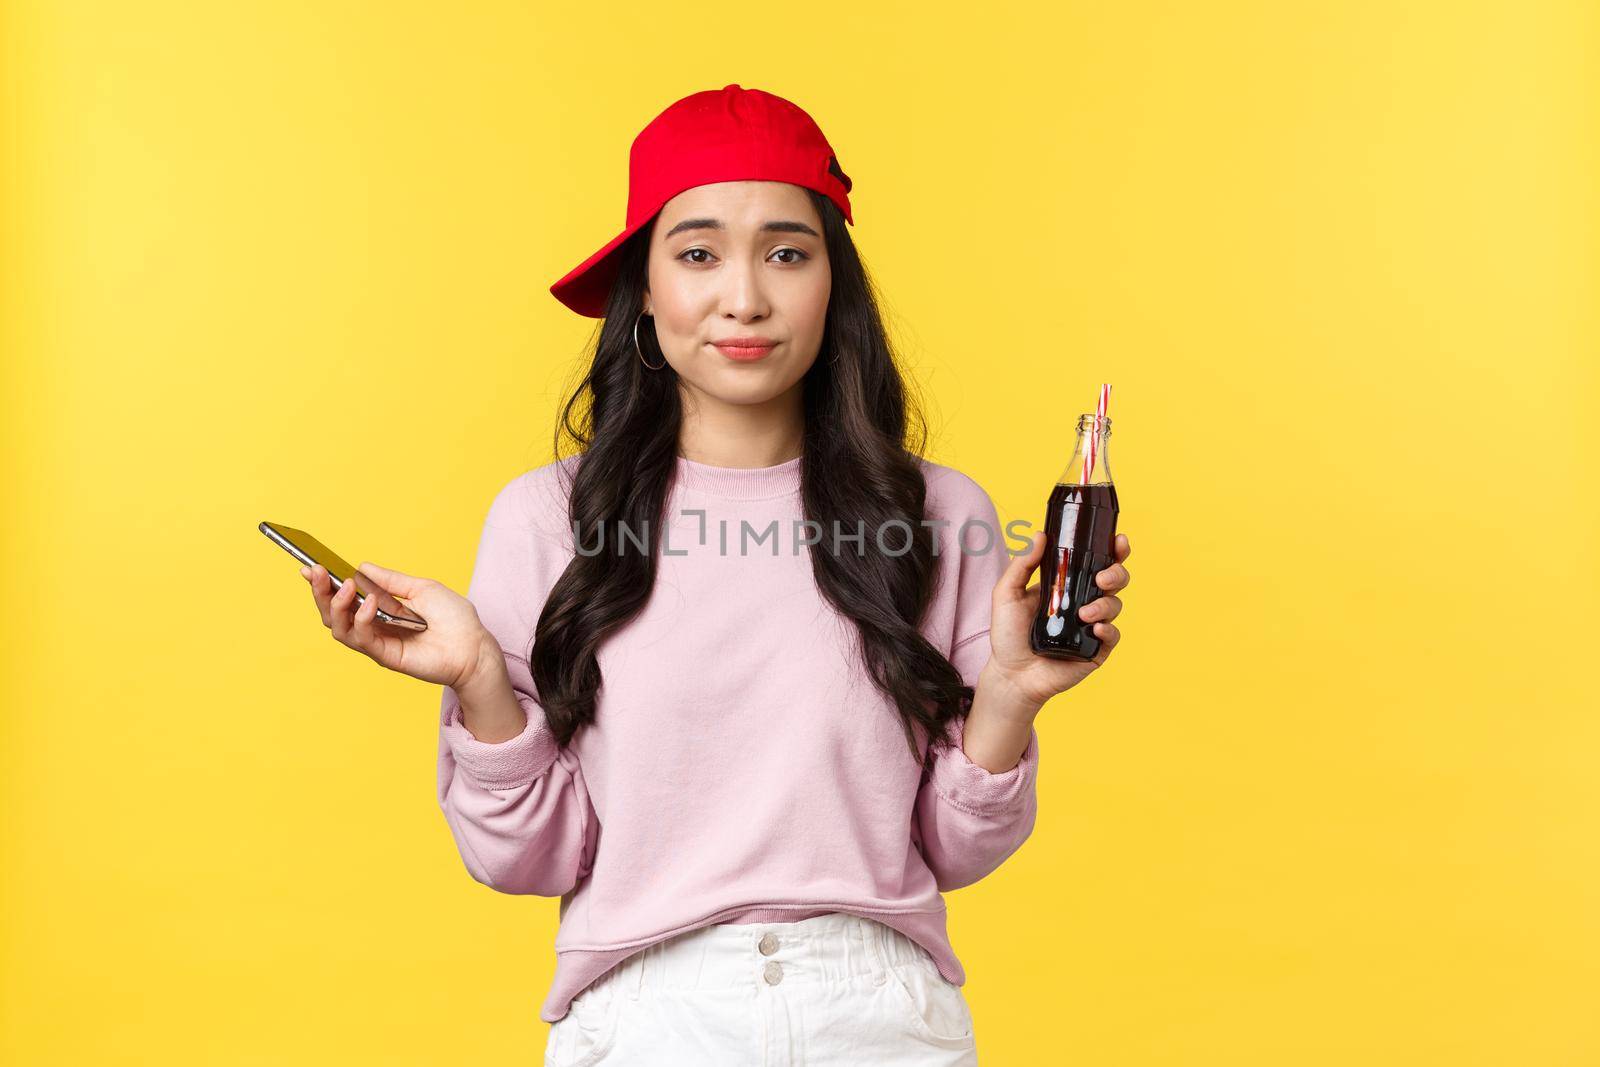 People emotions, drinks and summer leisure concept. Indecisive clueless cute asian girl in red cap, holding bottle with soda and mobile phone, shrugging unsure, yellow background.